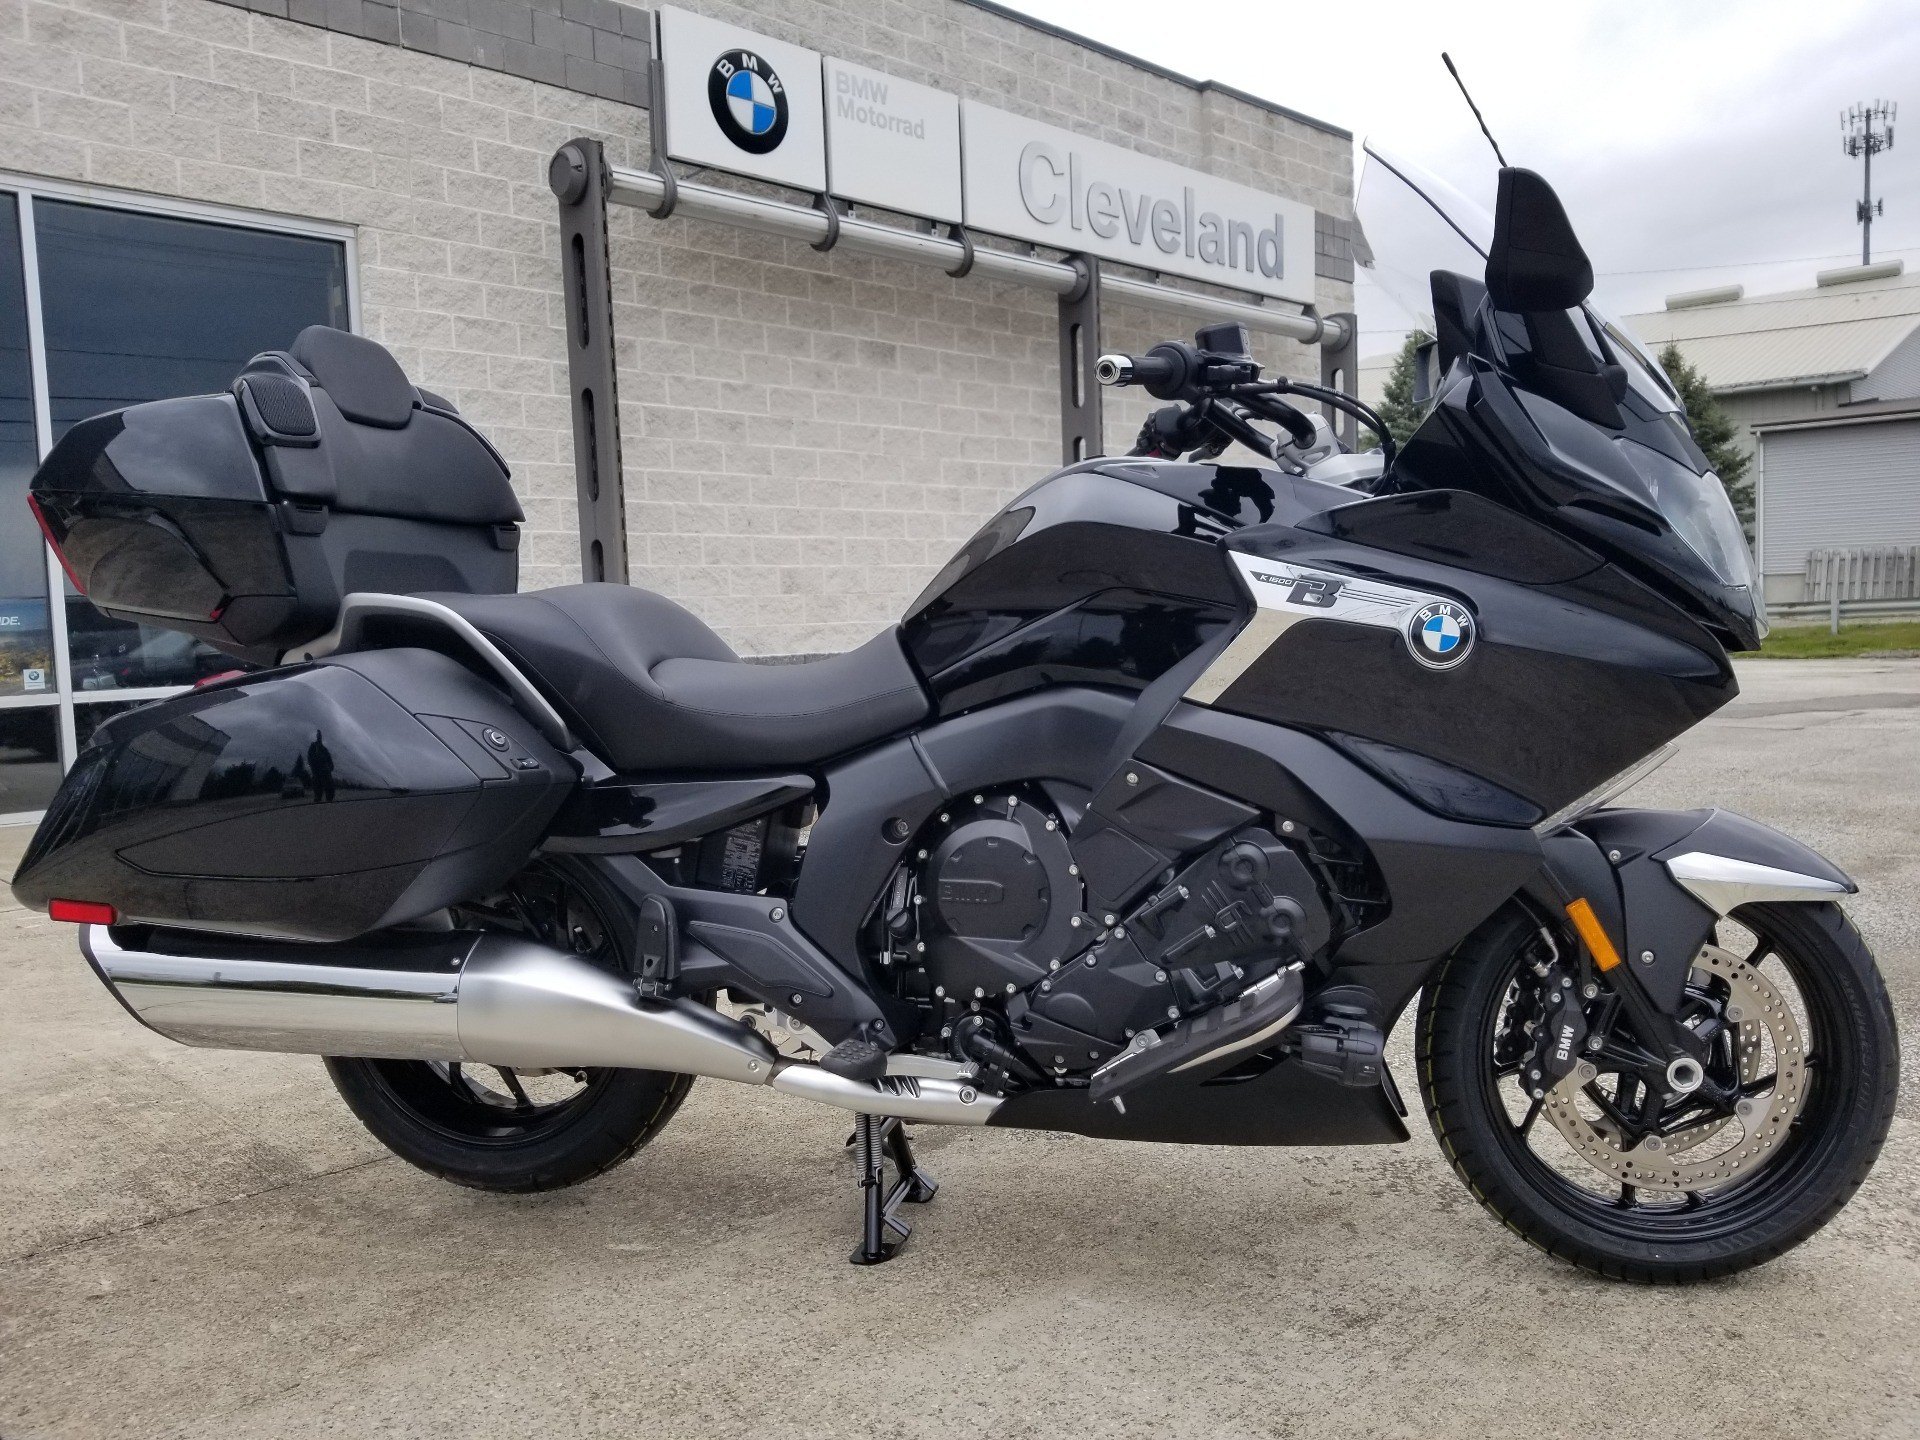 New Bmw K 1600 Grand America Motorcycles In Aurora Oh Stock Number N A